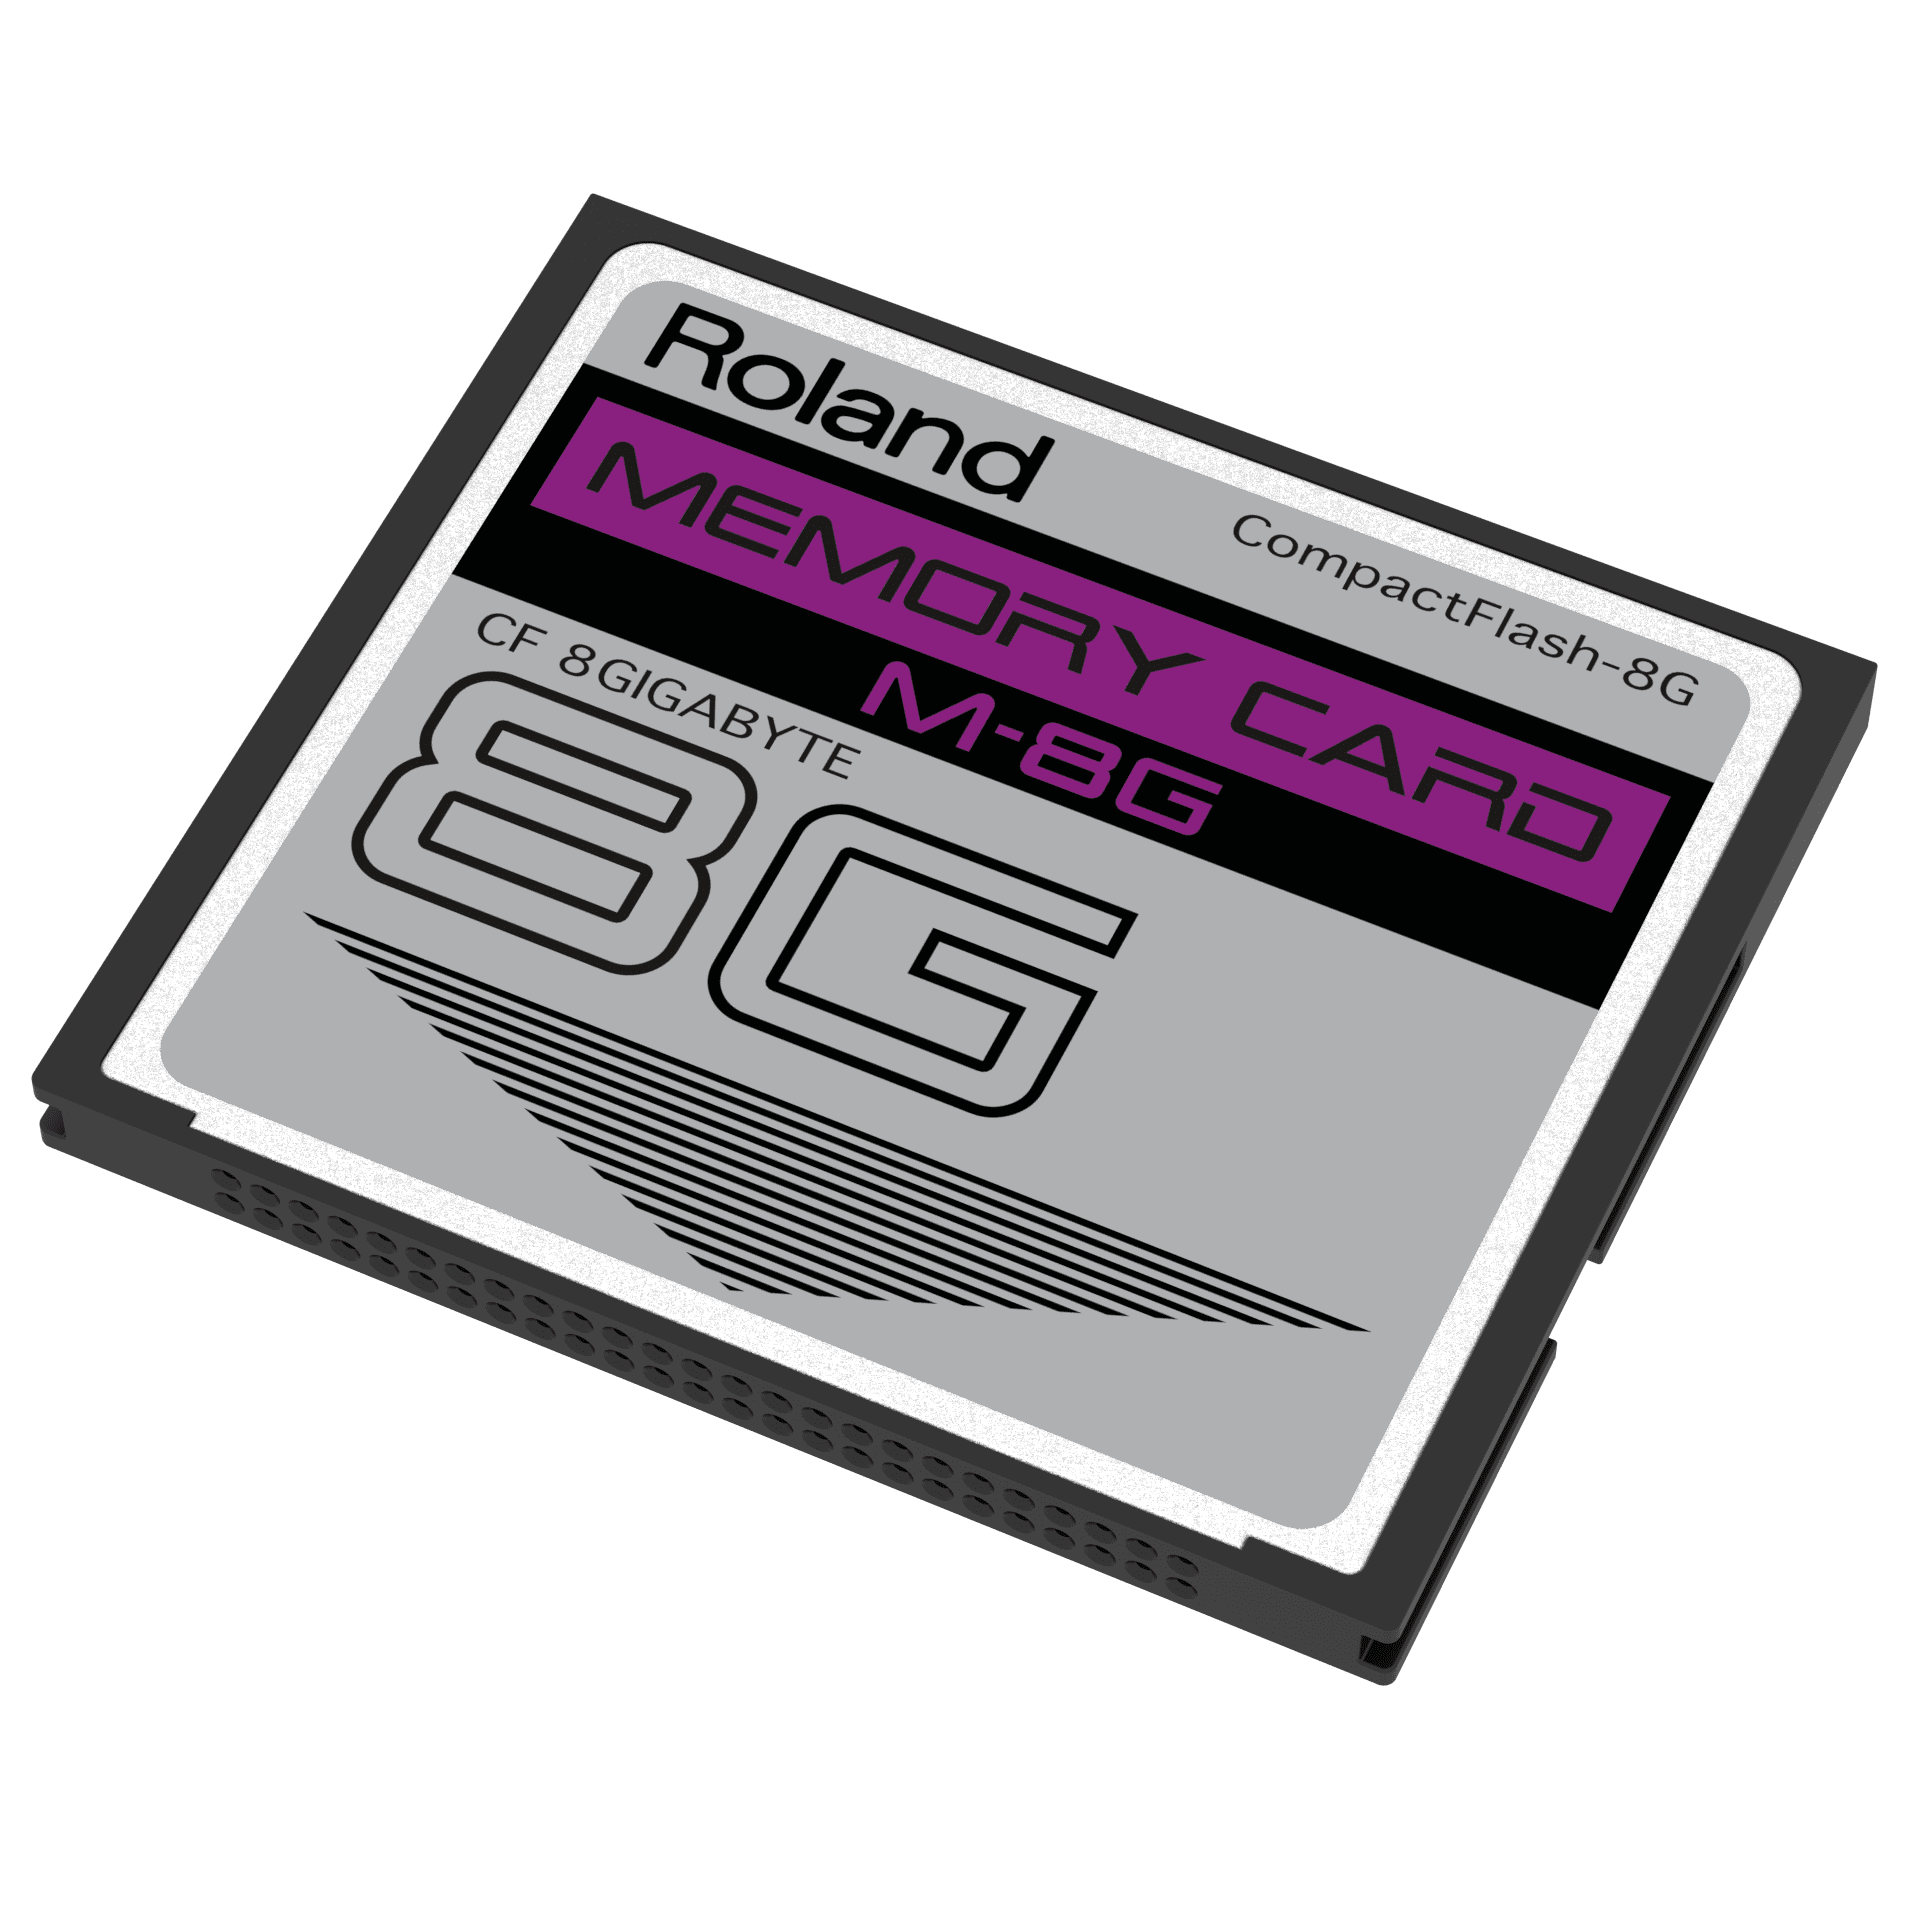 PCMCIA NOT INCLUDED ROLAND FANTOM XR 1GB COMPACT FLASH CF MEMORY CARD UPGRADE 